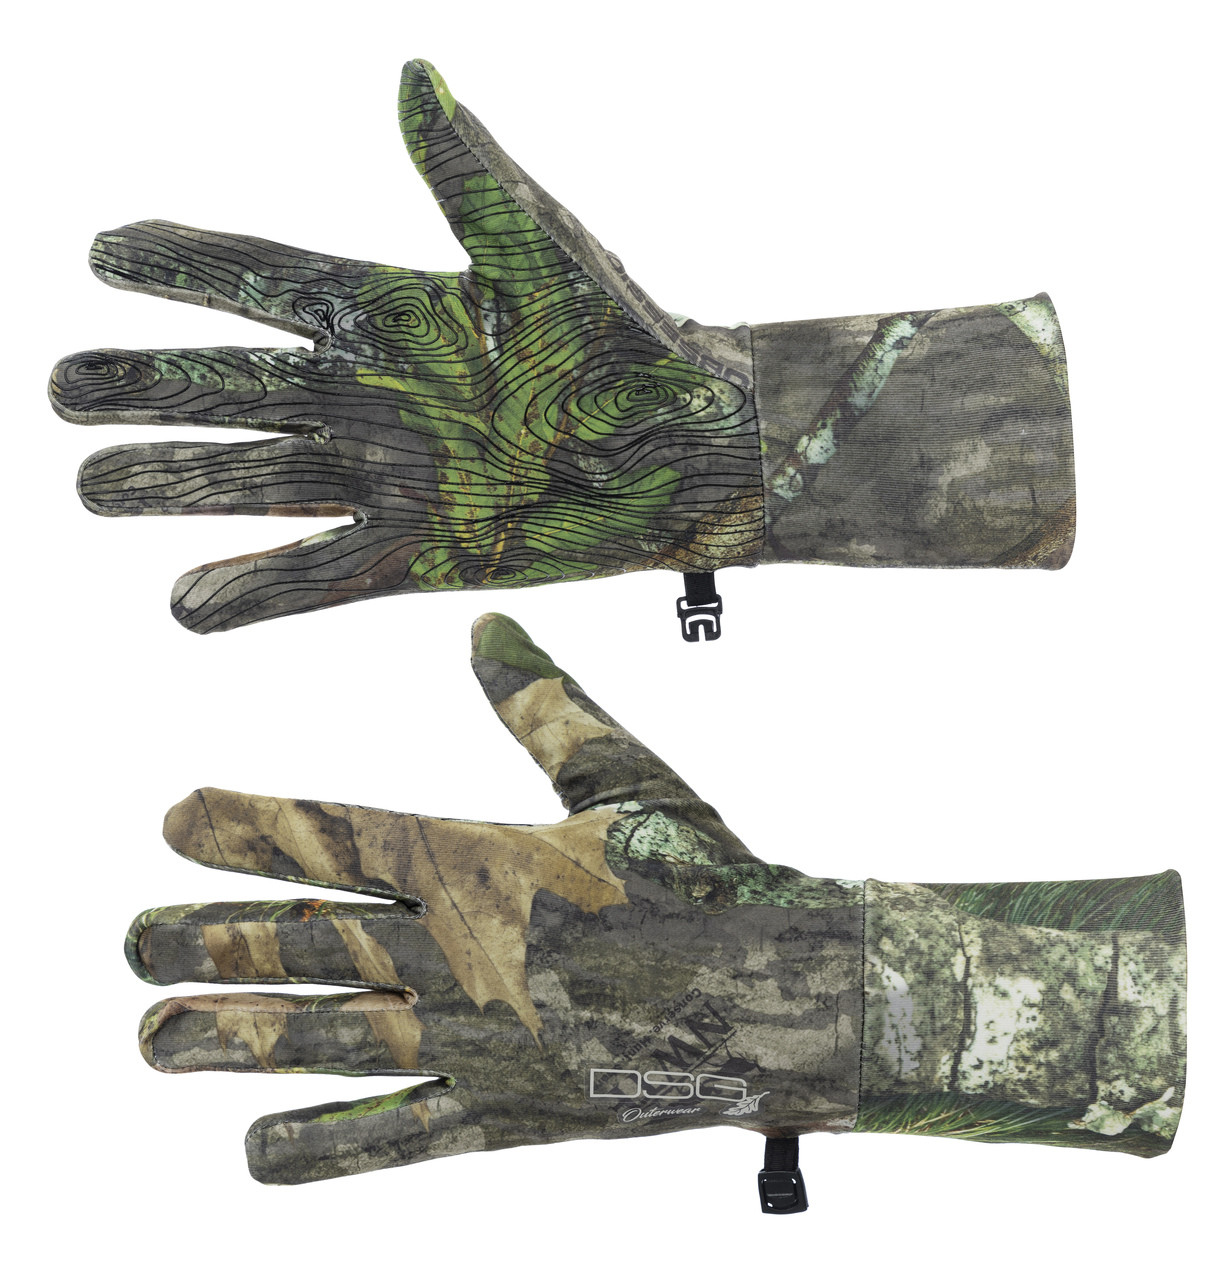 2 Pairs Insulated Winter Work Gloves Mossy Oak Camo Hunting Large ~ New